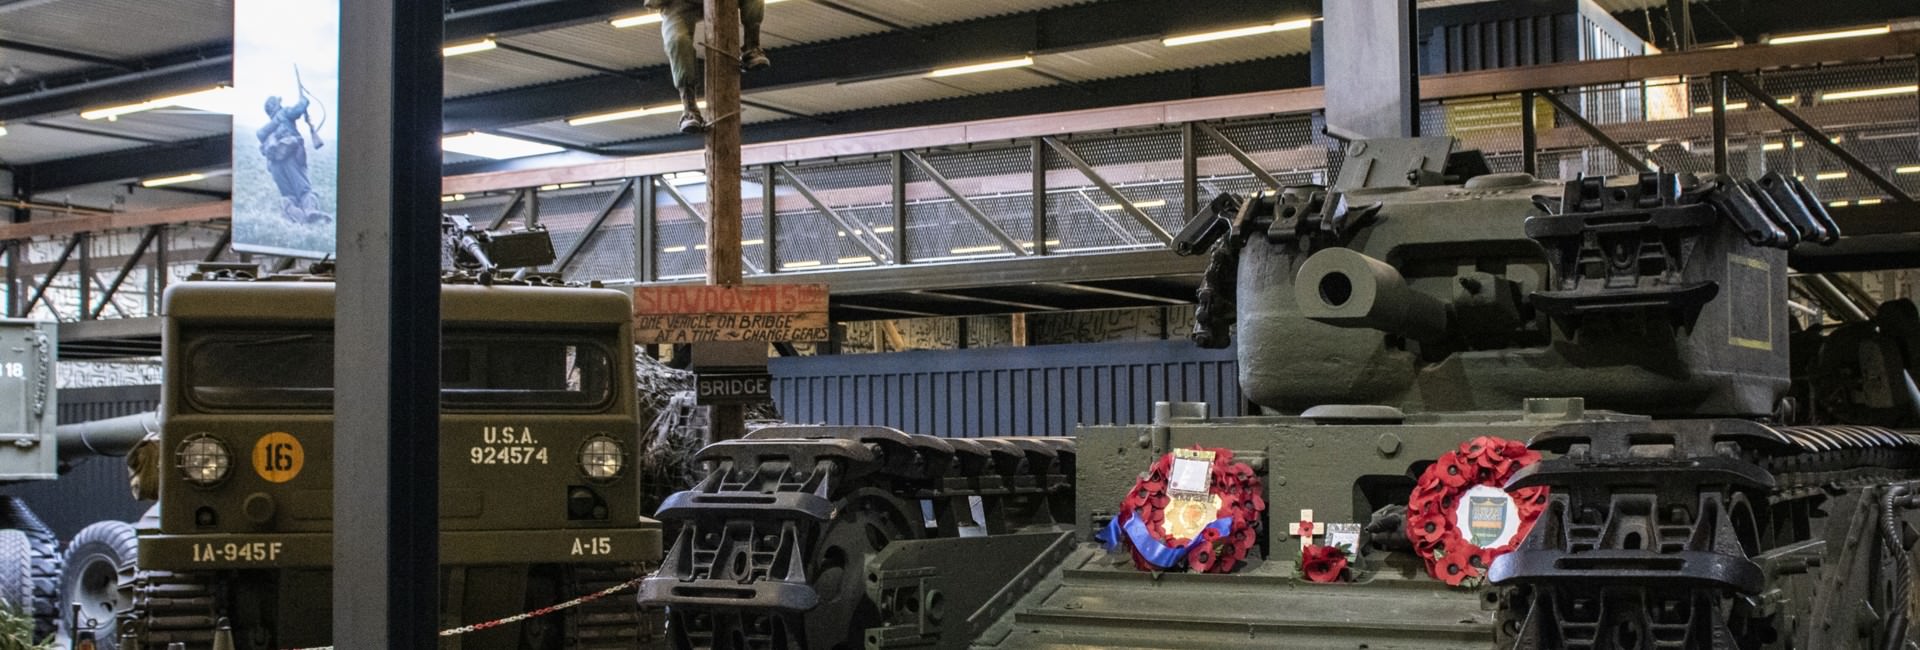 oorlogsmuseum - Military vehicle collection